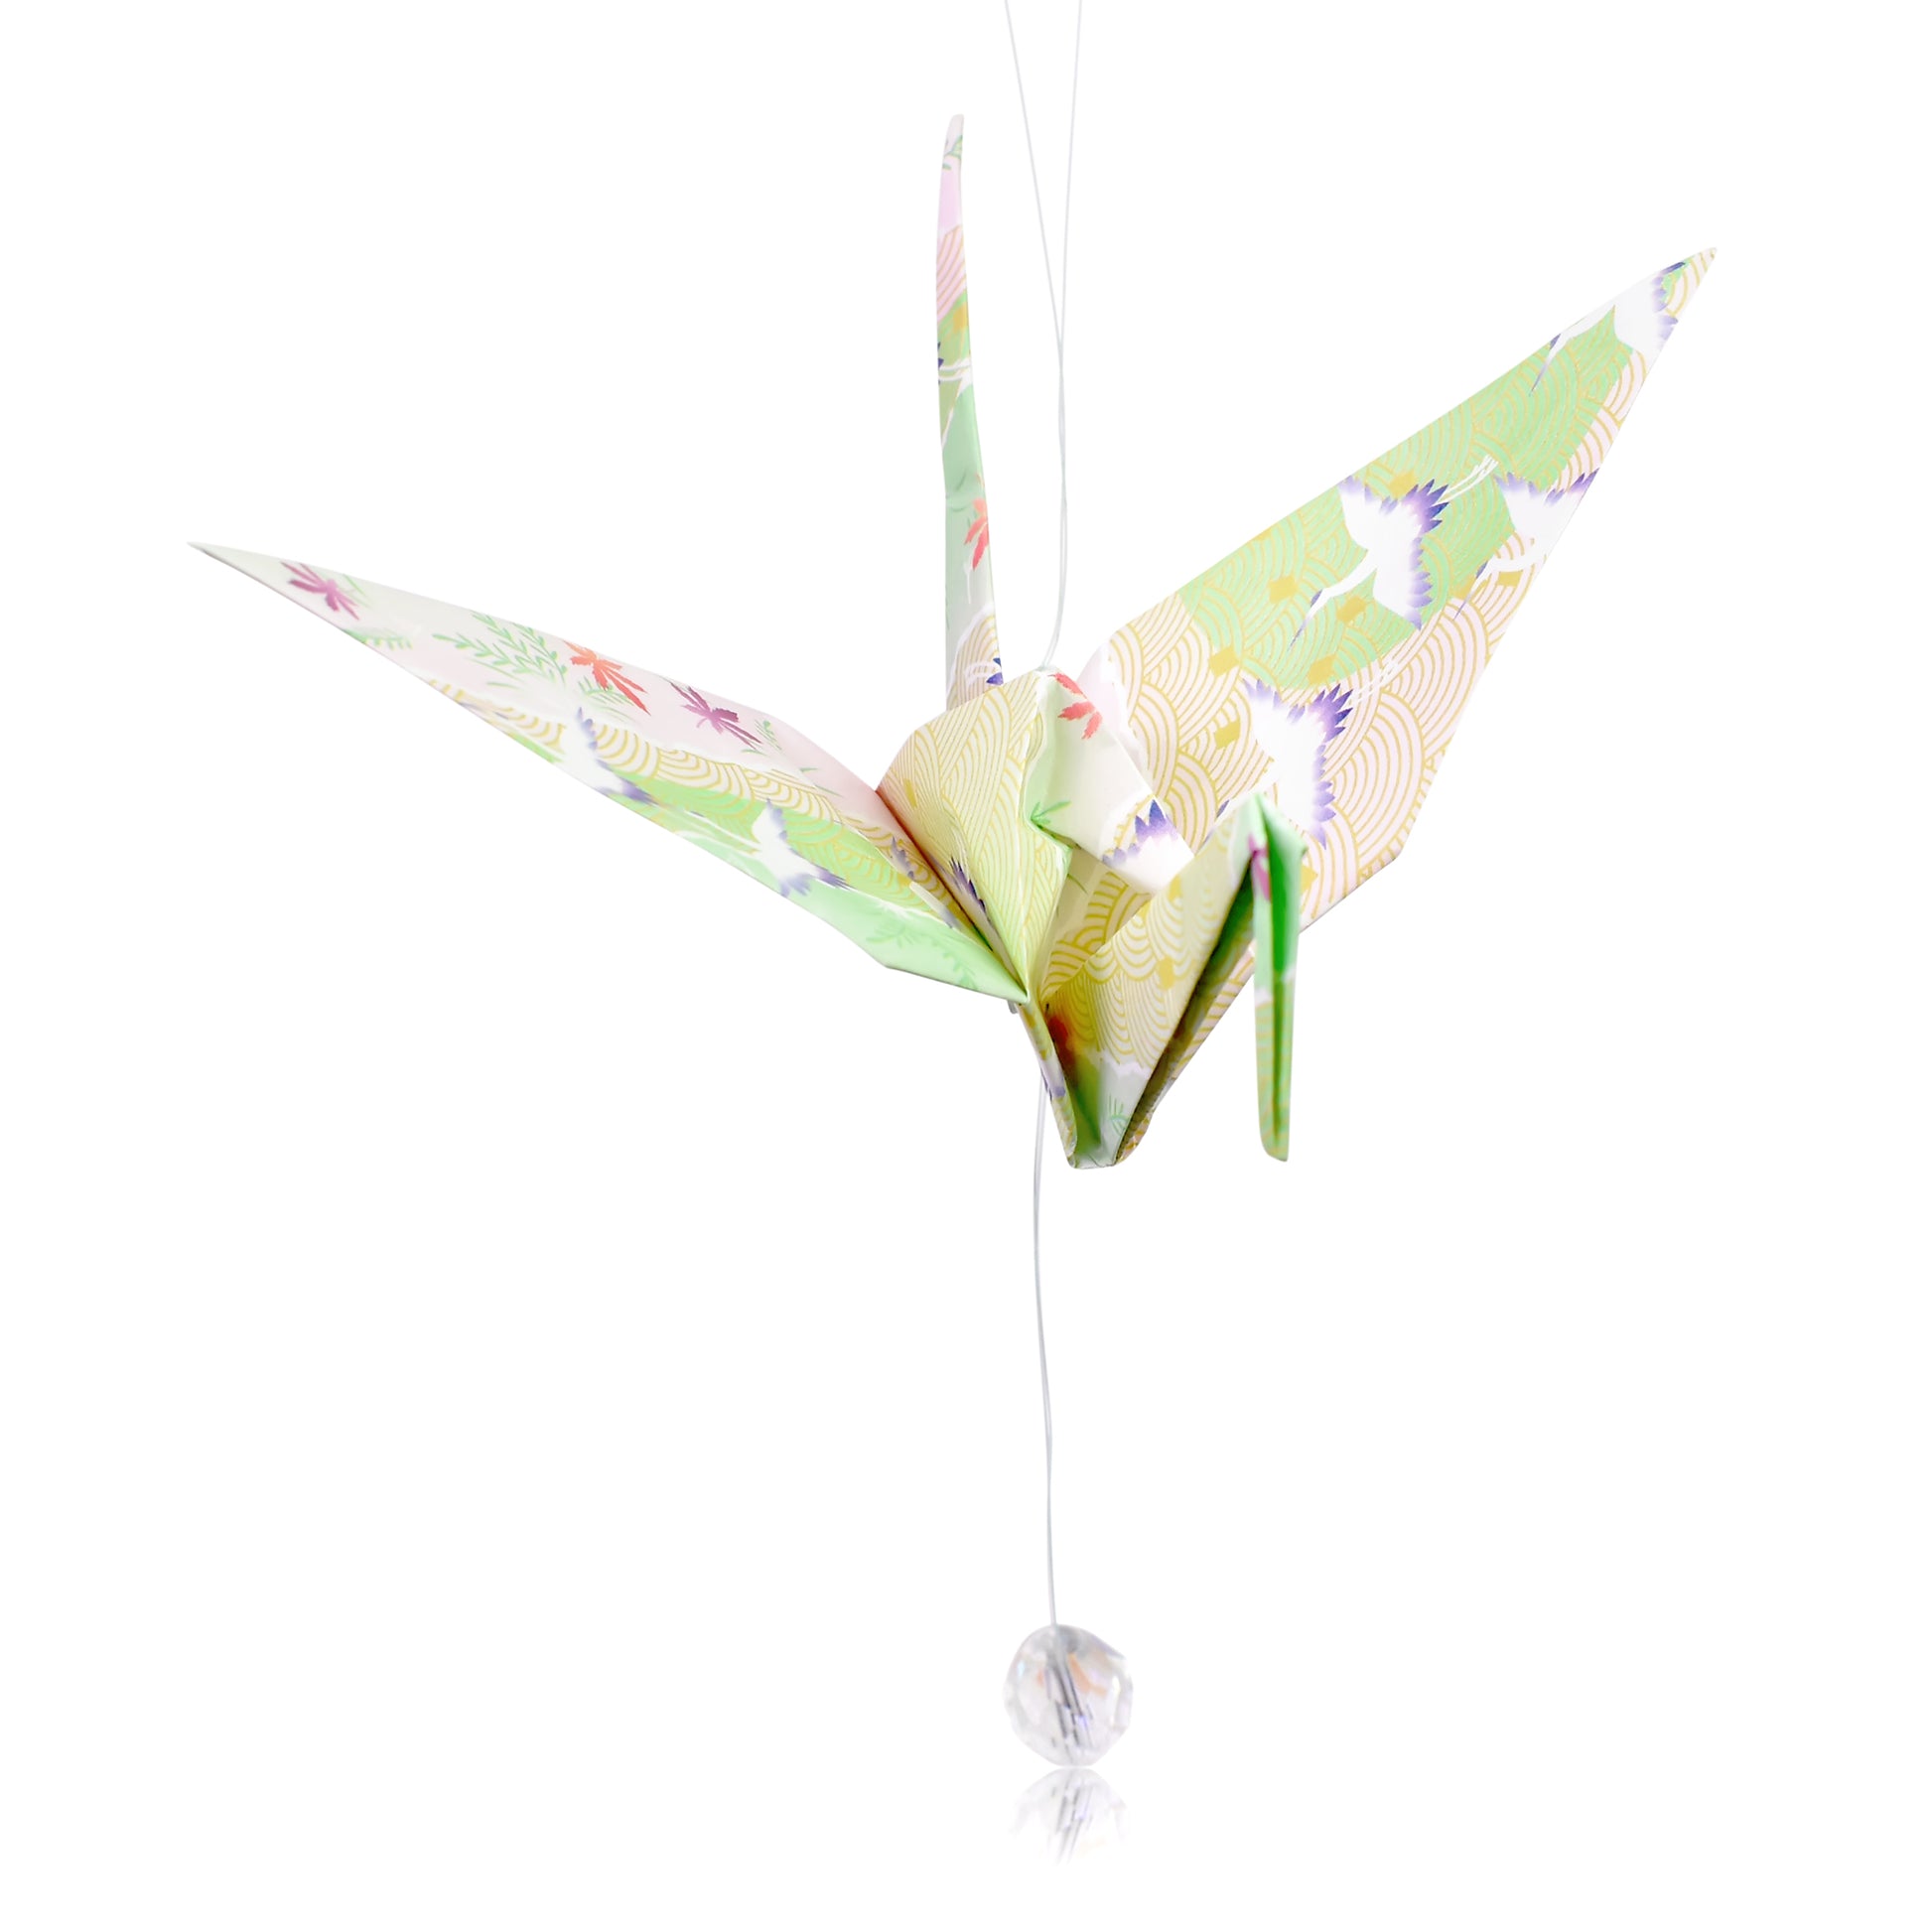 Give the Perfect Birthday Gift with Origami Cranes and April Birthstone